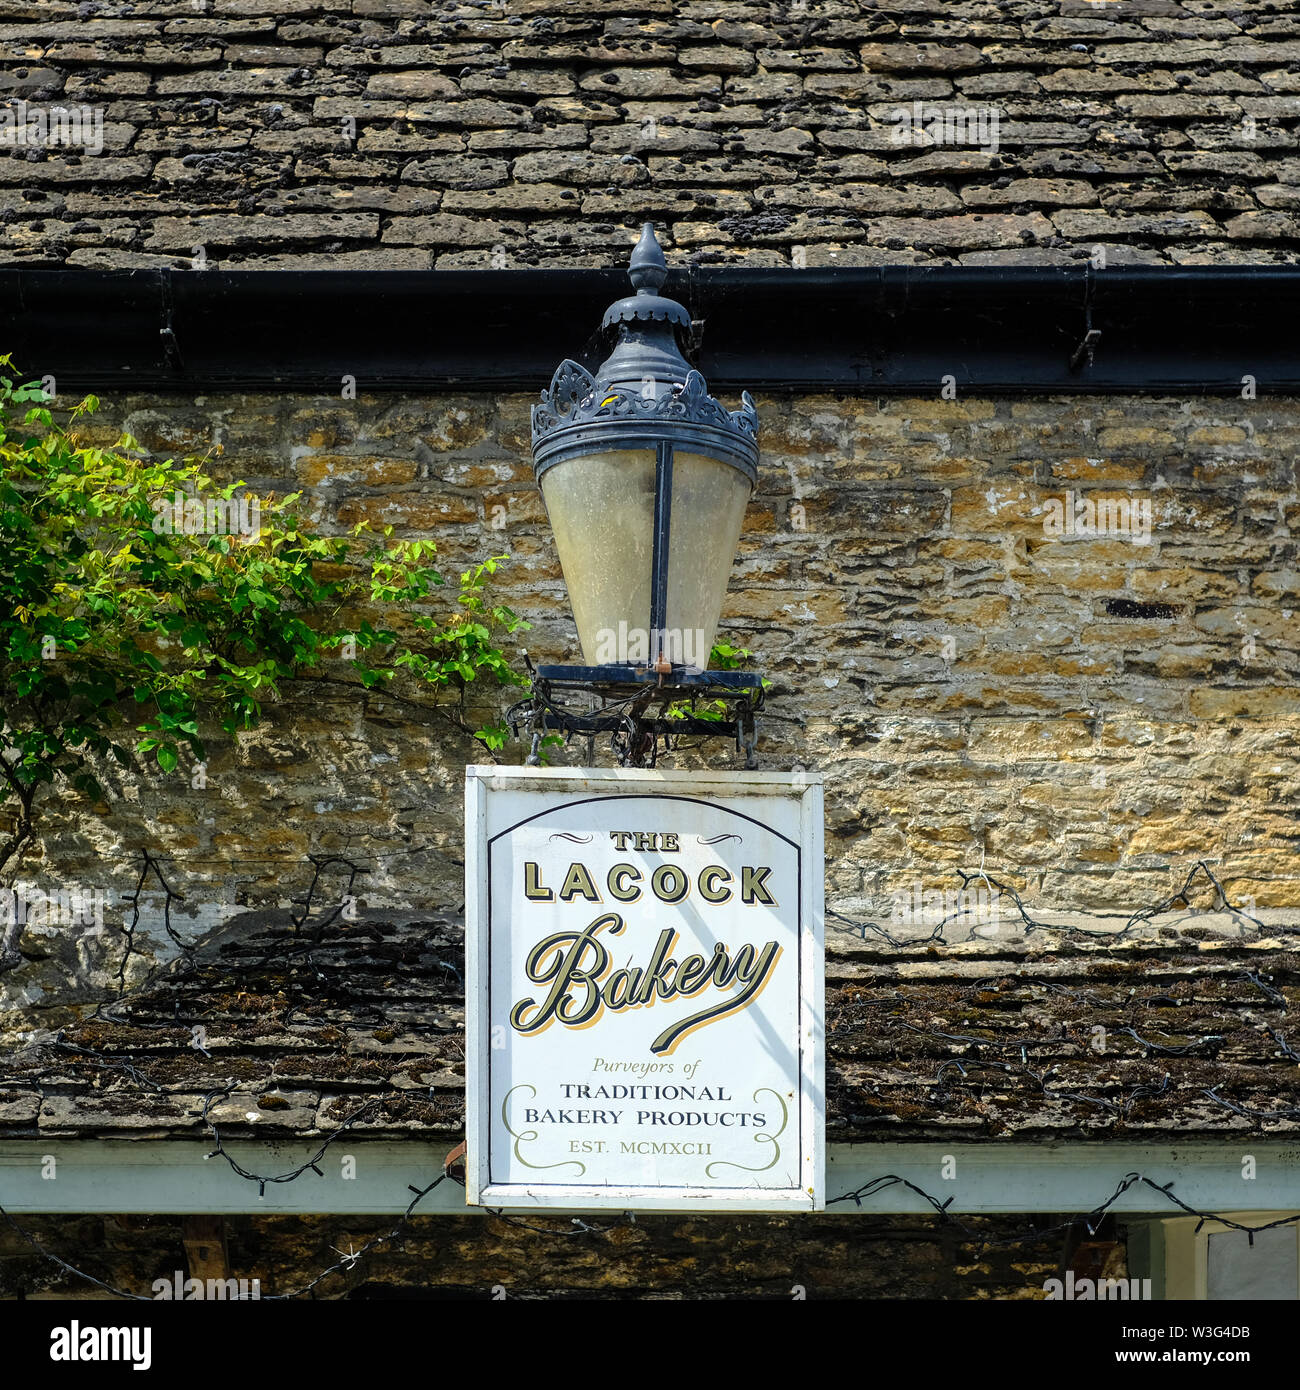 The Bakery in Lacock, Wiltshire, UK Stock Photo